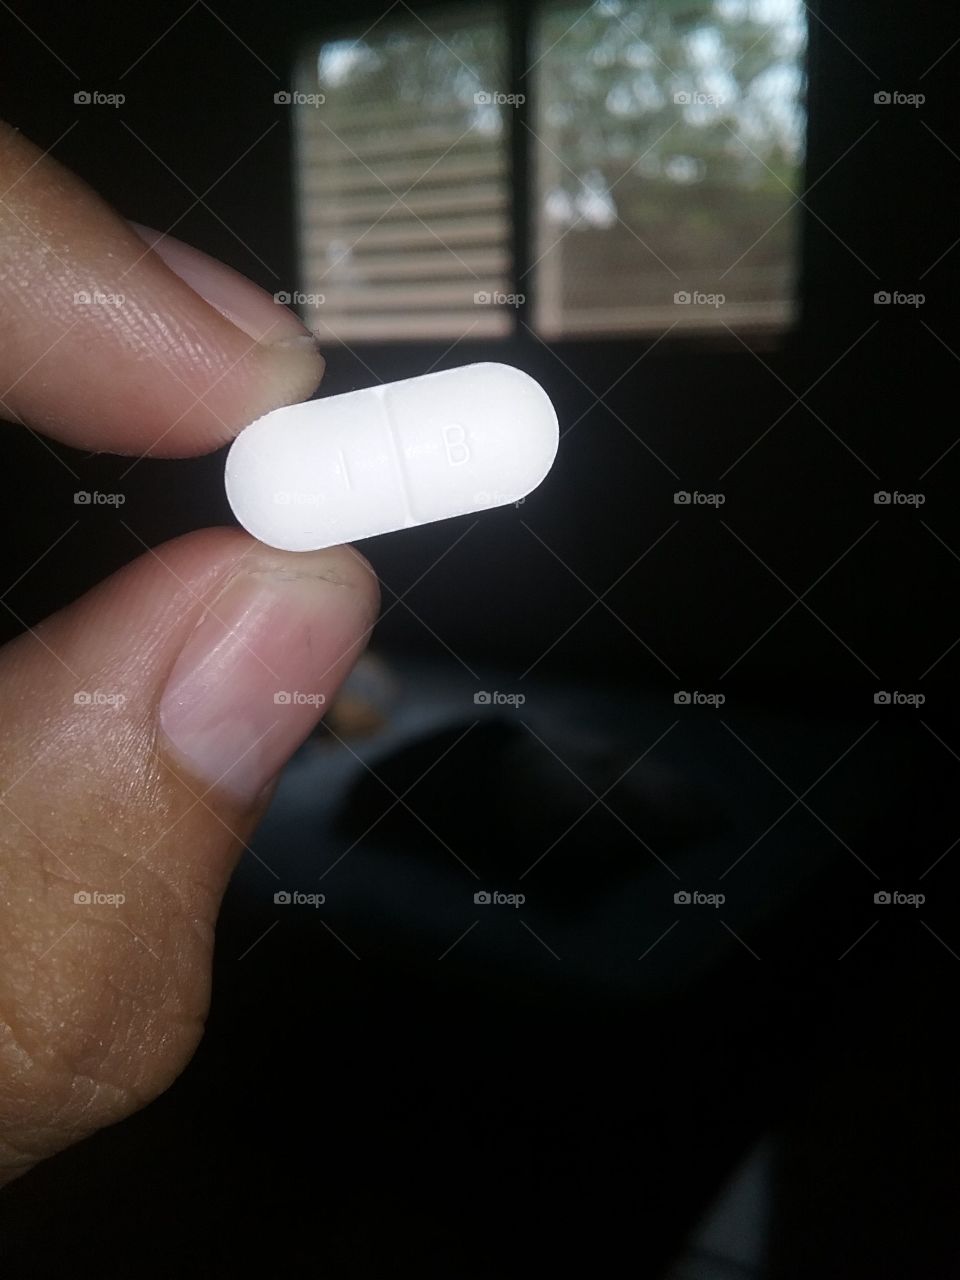 My daily pill